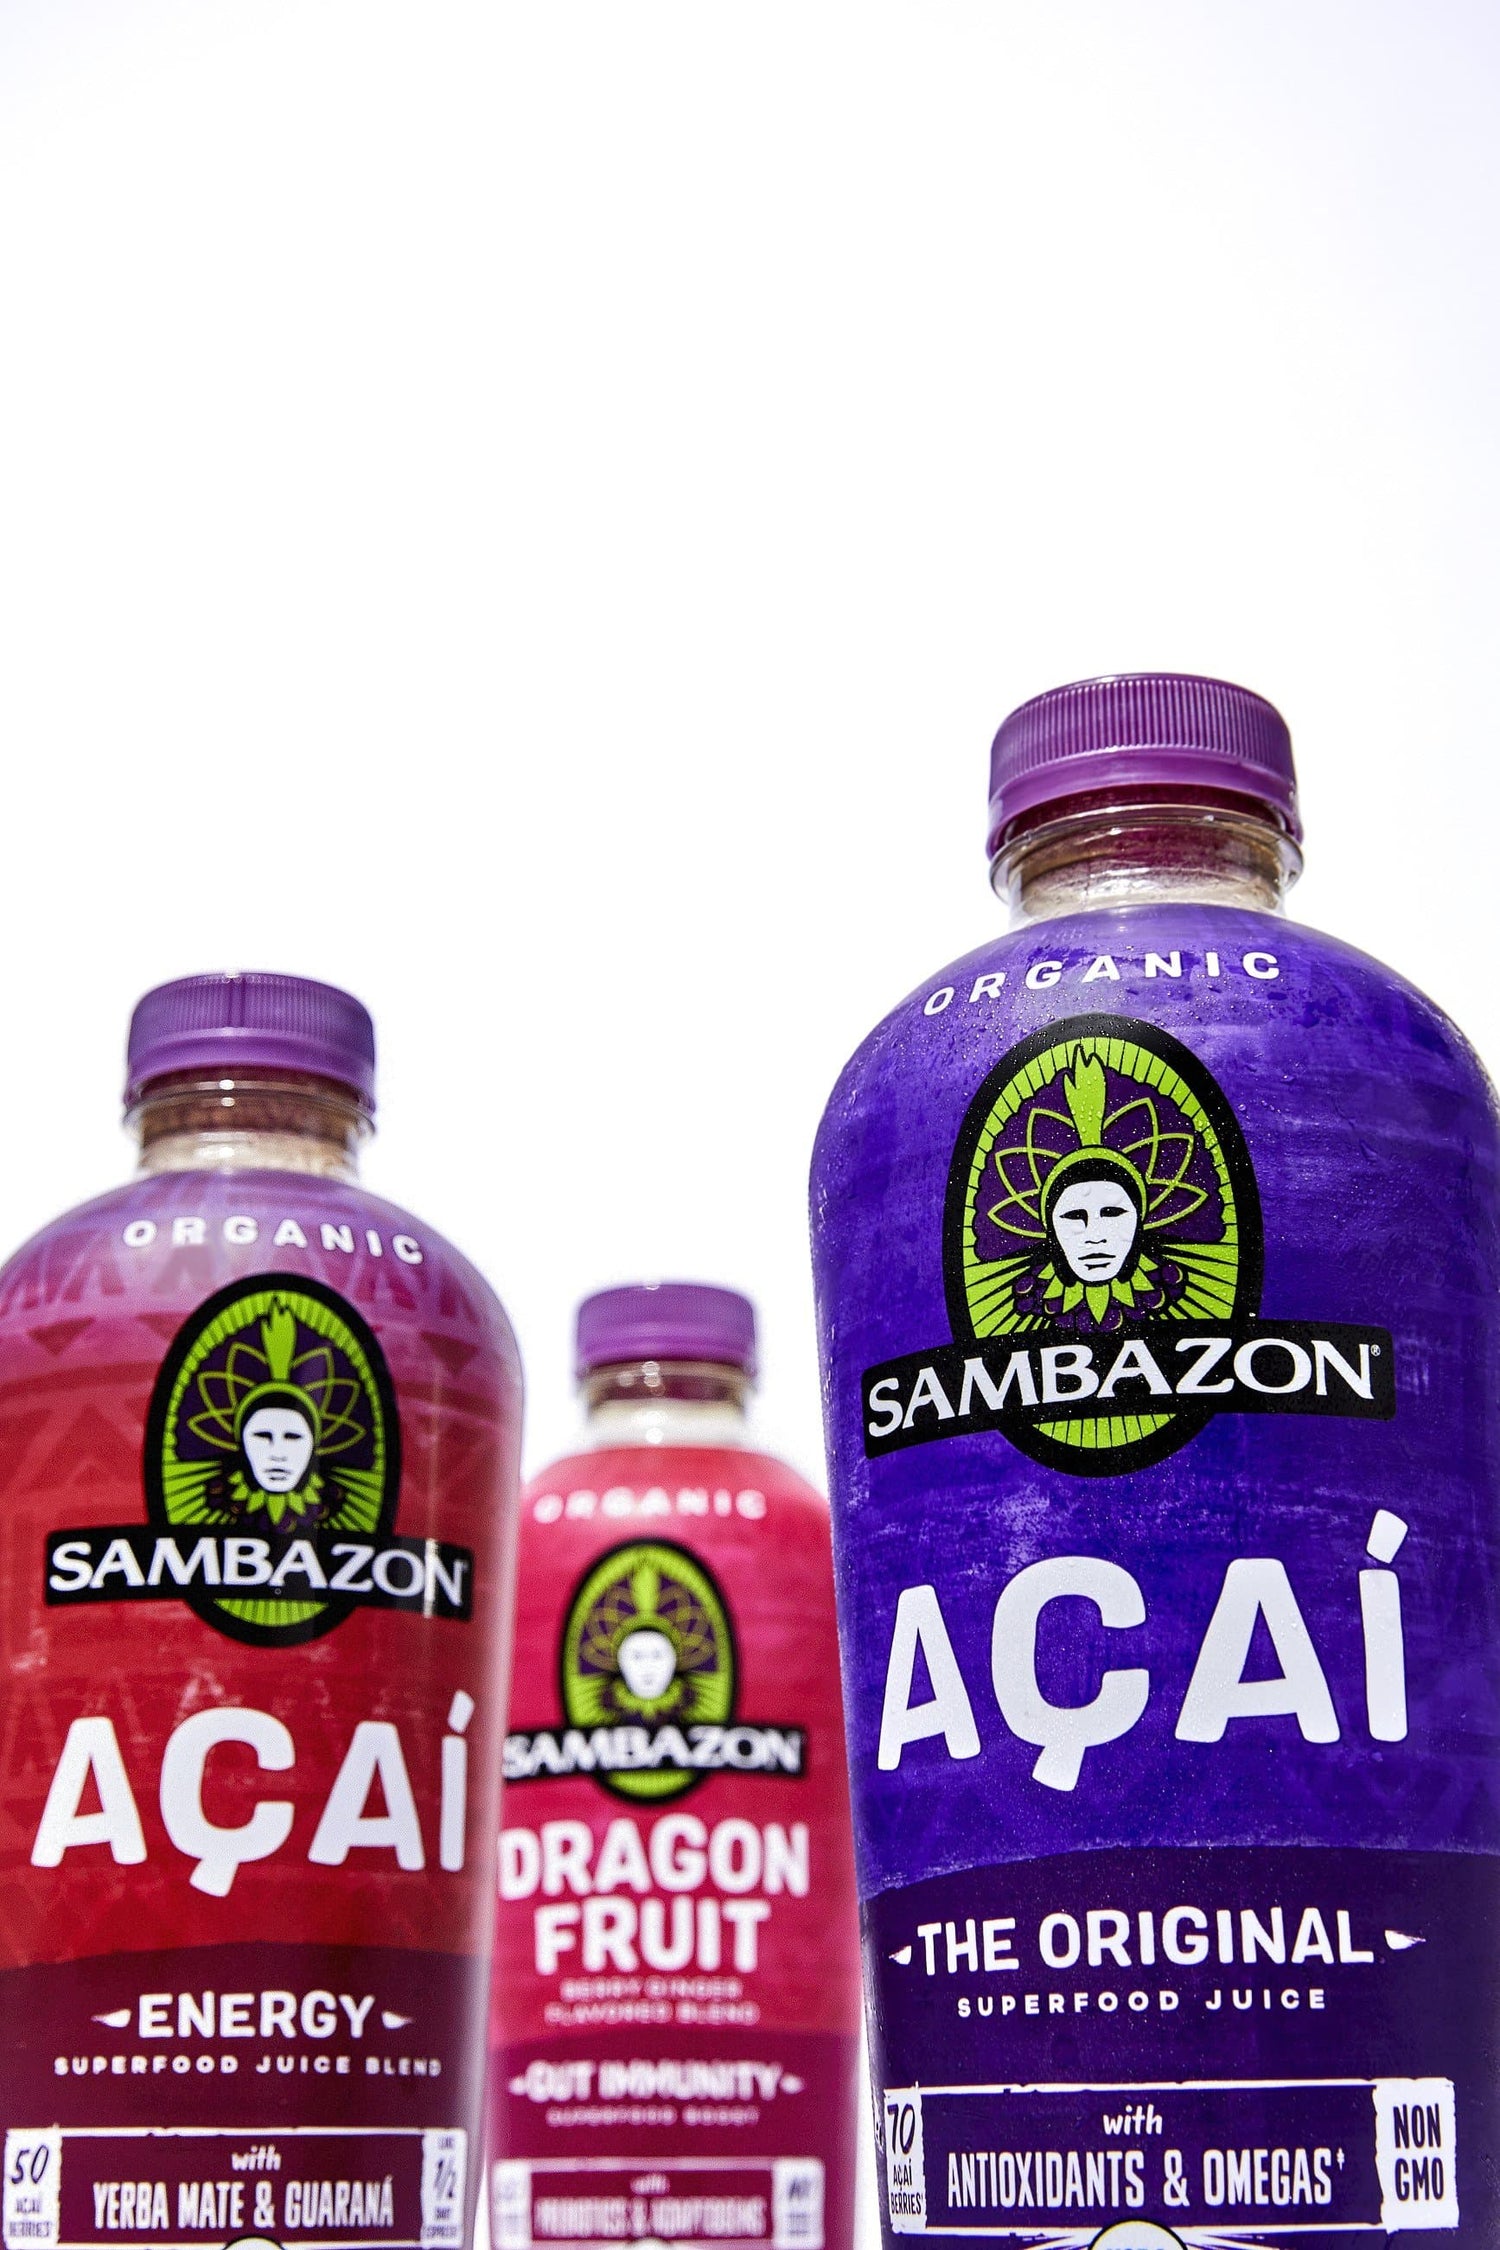 3 Bottles of Fresh Juice with flavors including Original, Energy and Dragon Fruit